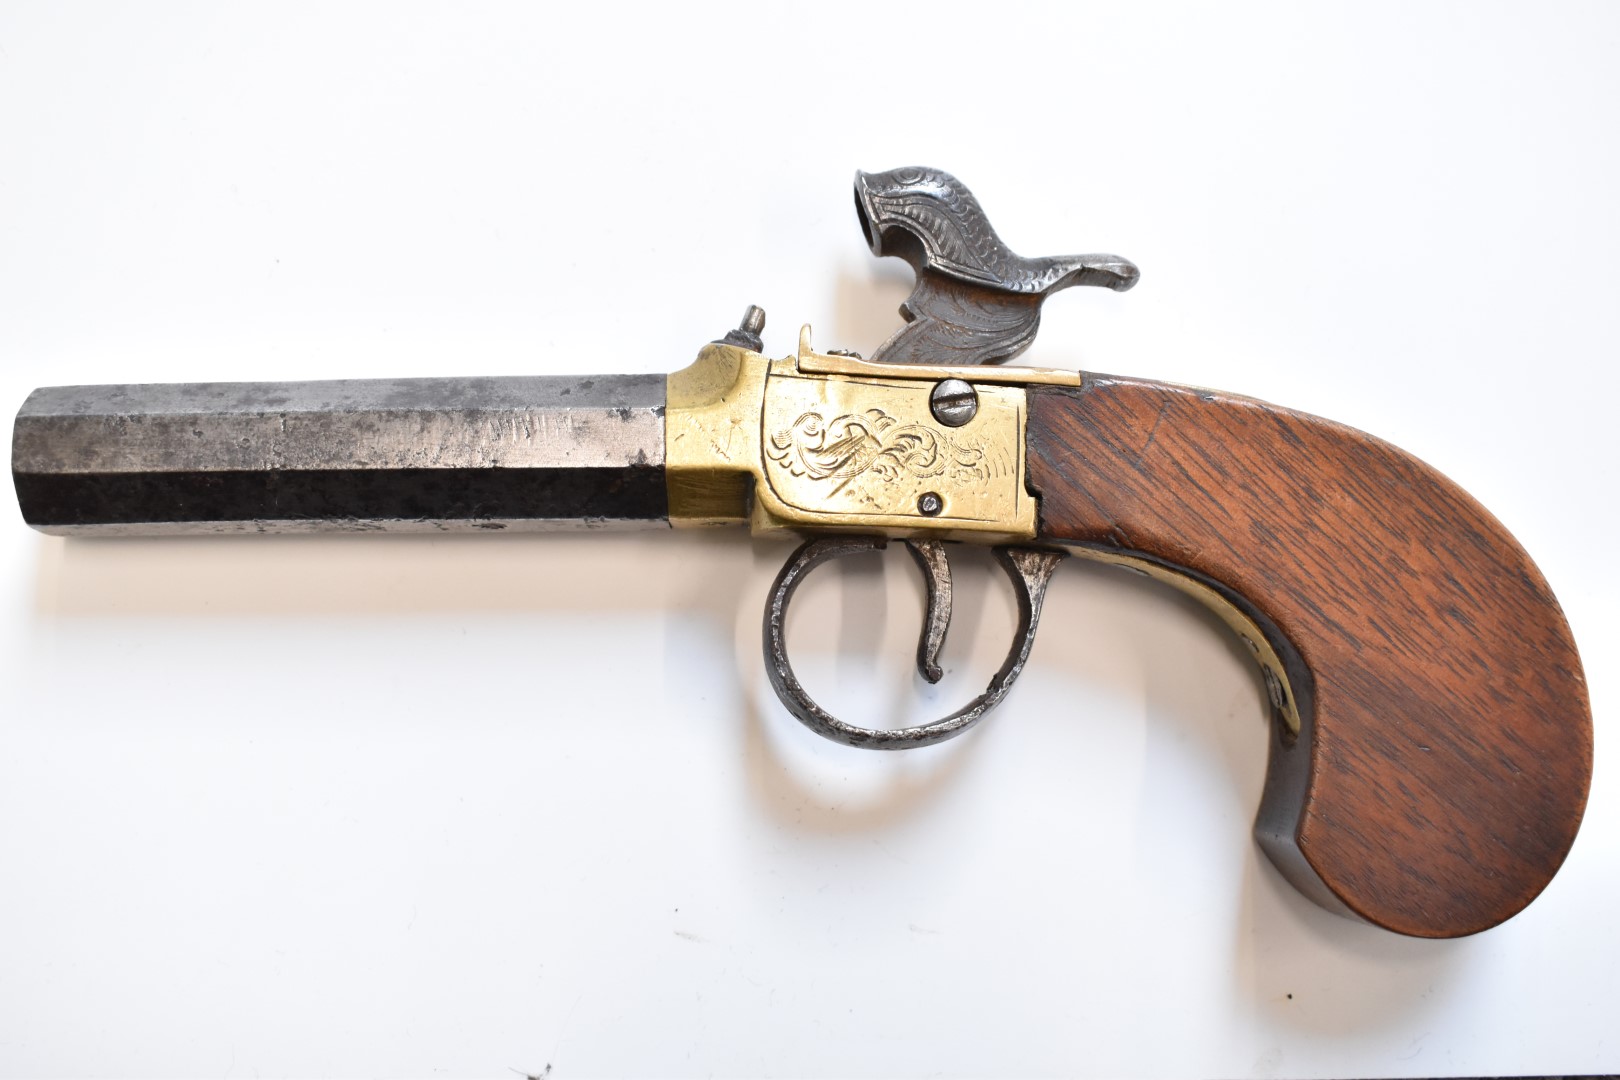 Unnamed single barrel percussion hammer action pocket pistol with engraved brass frame and top - Image 7 of 7